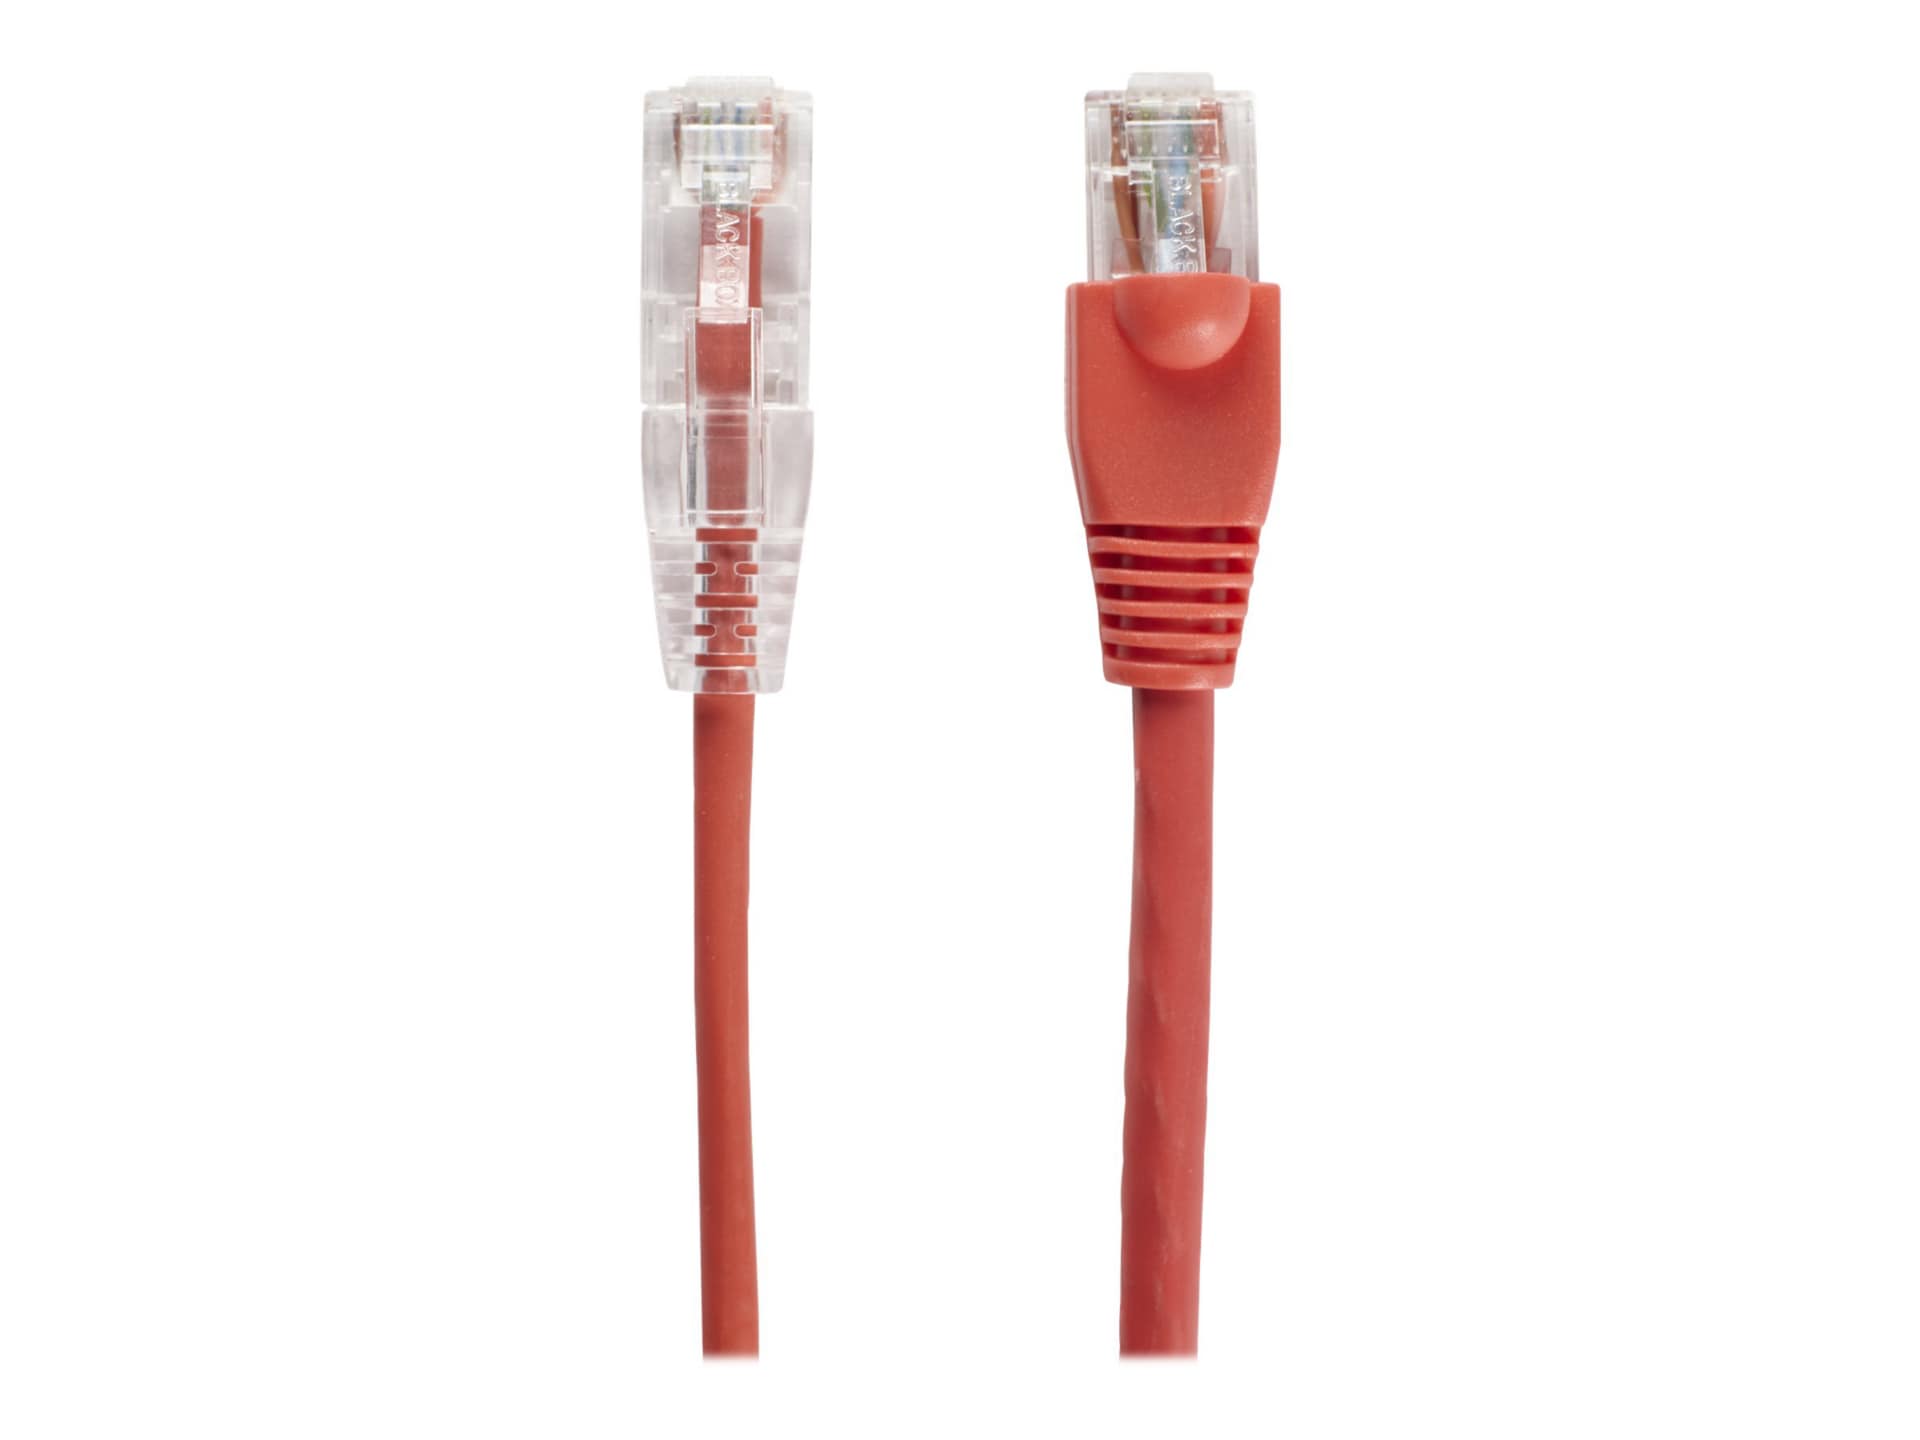 Black Box Slim-Net patch cable - 5 ft - red